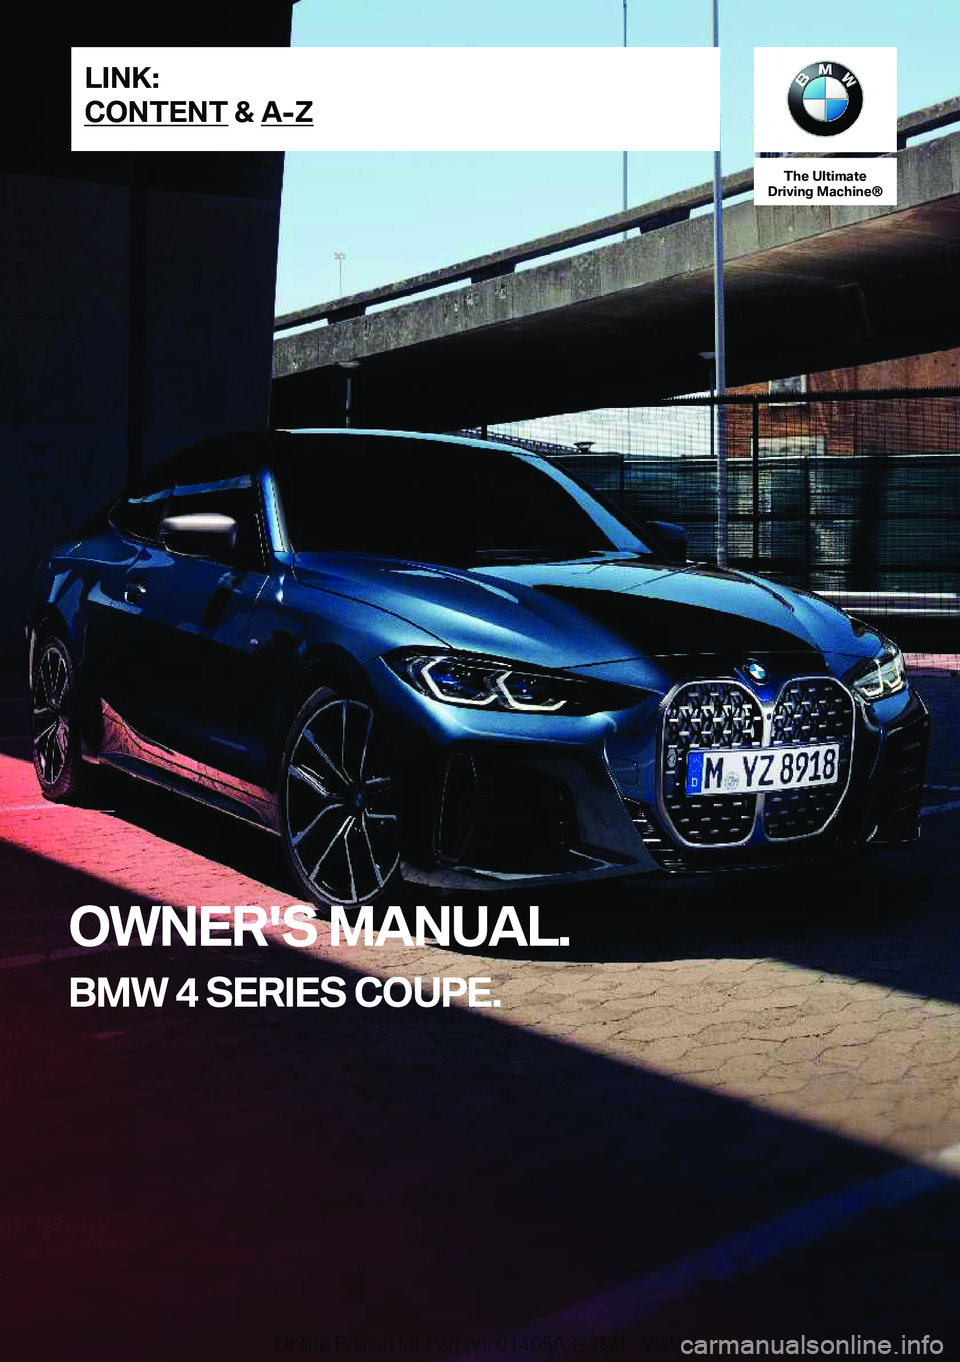 BMW 4 SERIES 2022  Owners Manual �T�h�e��U�l�t�i�m�a�t�e
�D�r�i�v�i�n�g��M�a�c�h�i�n�e�n
�O�W�N�E�R�'�S��M�A�N�U�A�L�.
�B�M�W��4��S�E�R�I�E�S��C�O�U�P�E�.�L�I�N�K�:
�C�O�N�T�E�N�T��&��A�-�Z�O�n�l�i�n�e��E�d�i�t�i�o�n��f